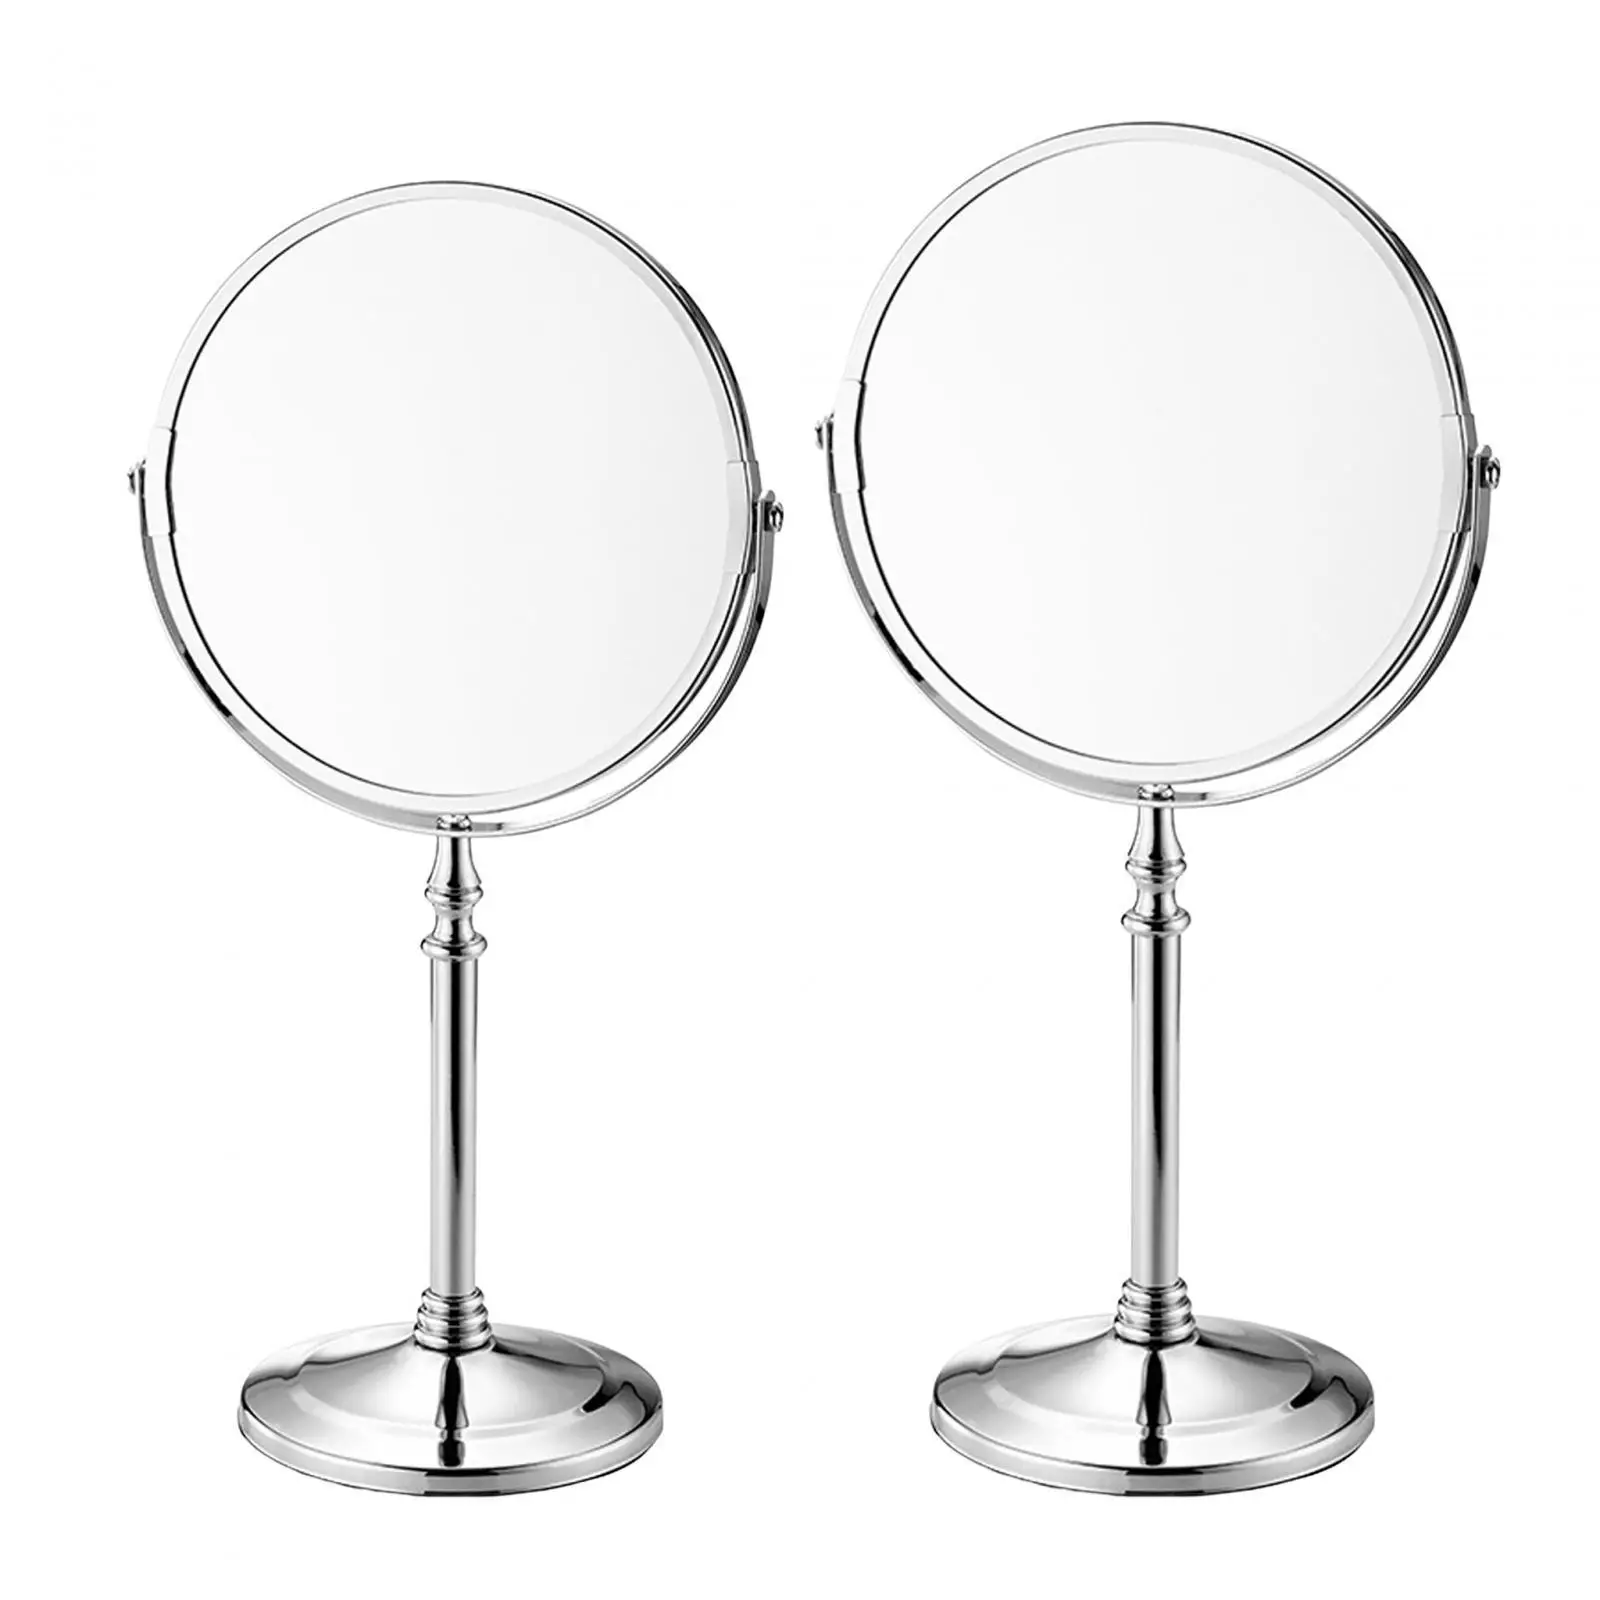 Double Sided Makeup Mirror Thick Base and Frame Round Tabletop Cosmetic Mirror for Bathroom Dresser Bedroom Home Girls Women